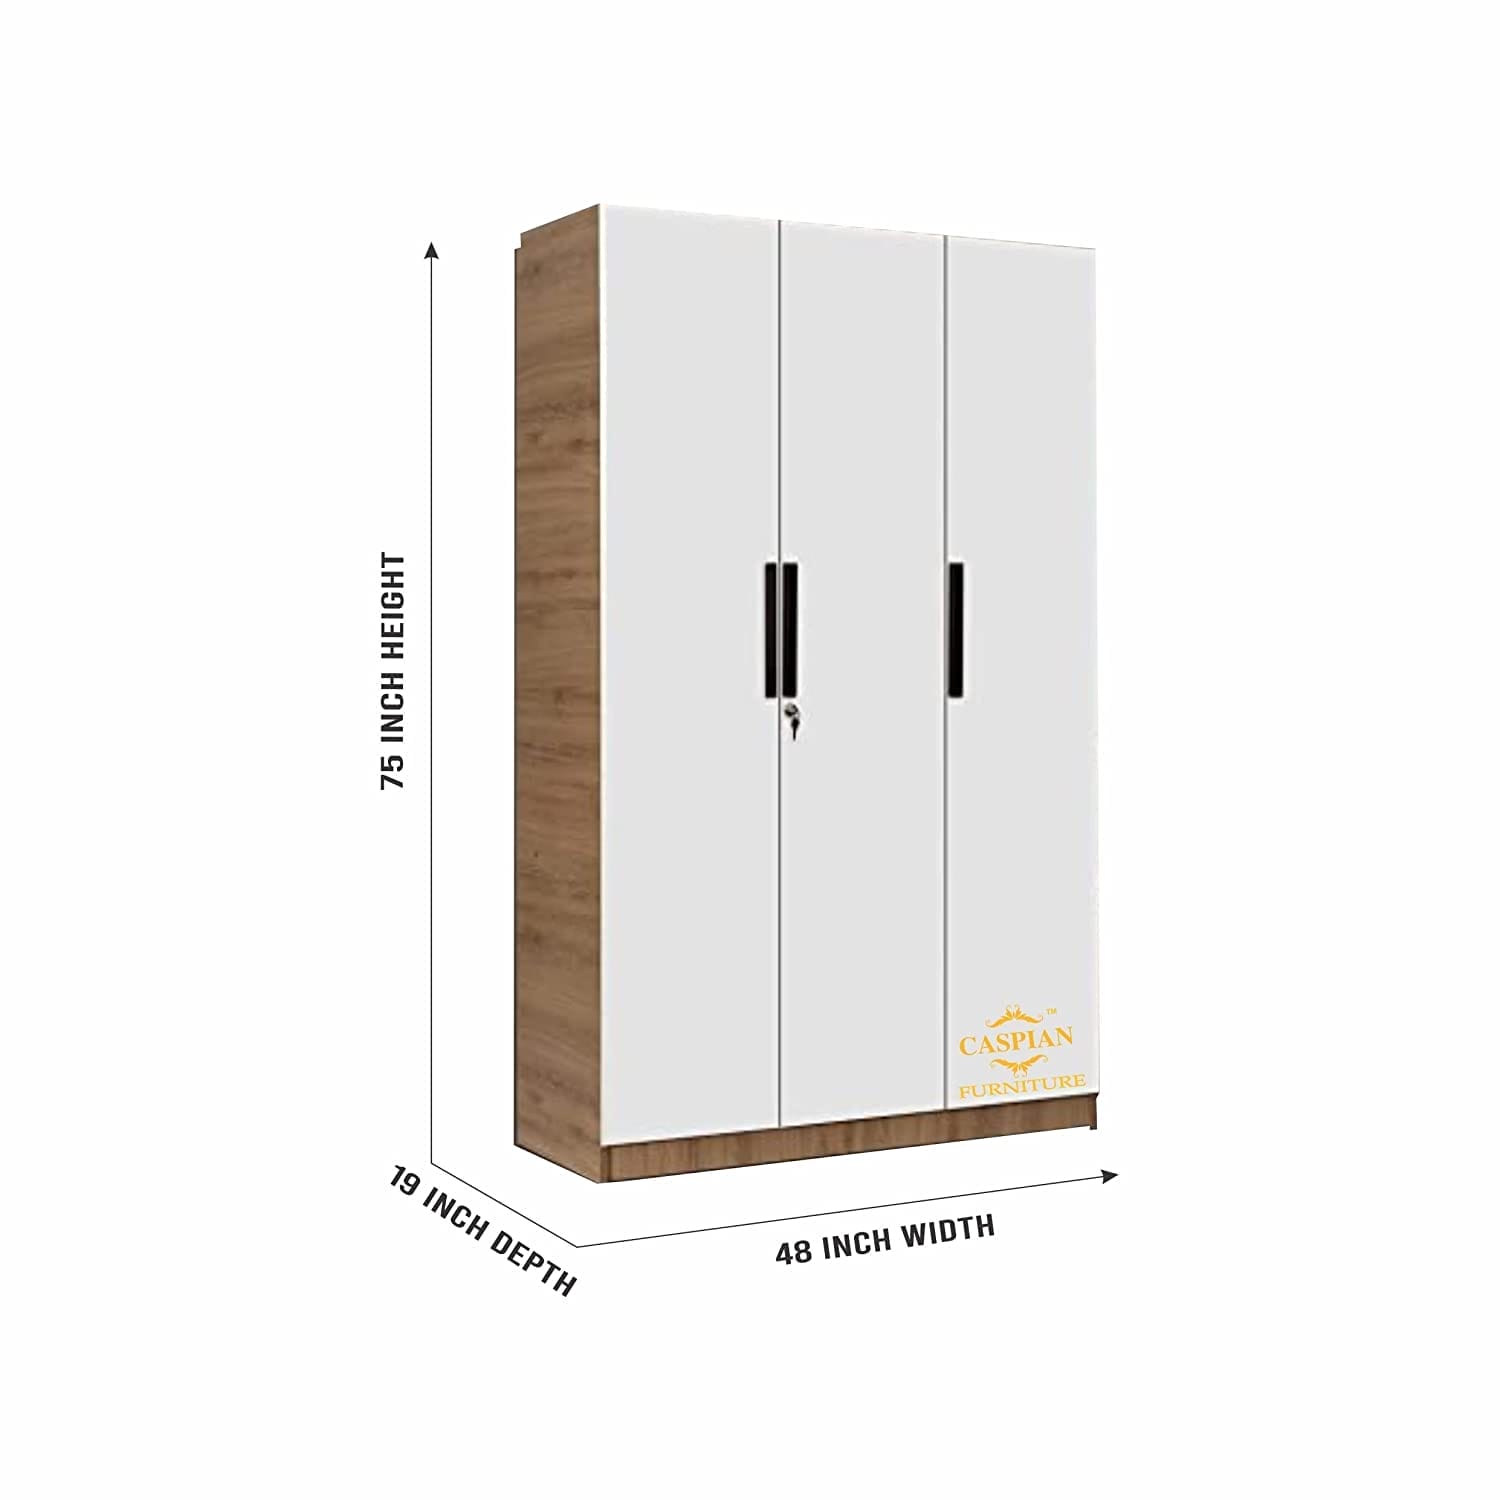 Engineered Wood 3 Door Wardrobe with Drawer, Shelves & Hanging Space for Clothes || Wooden Utility Cupboard